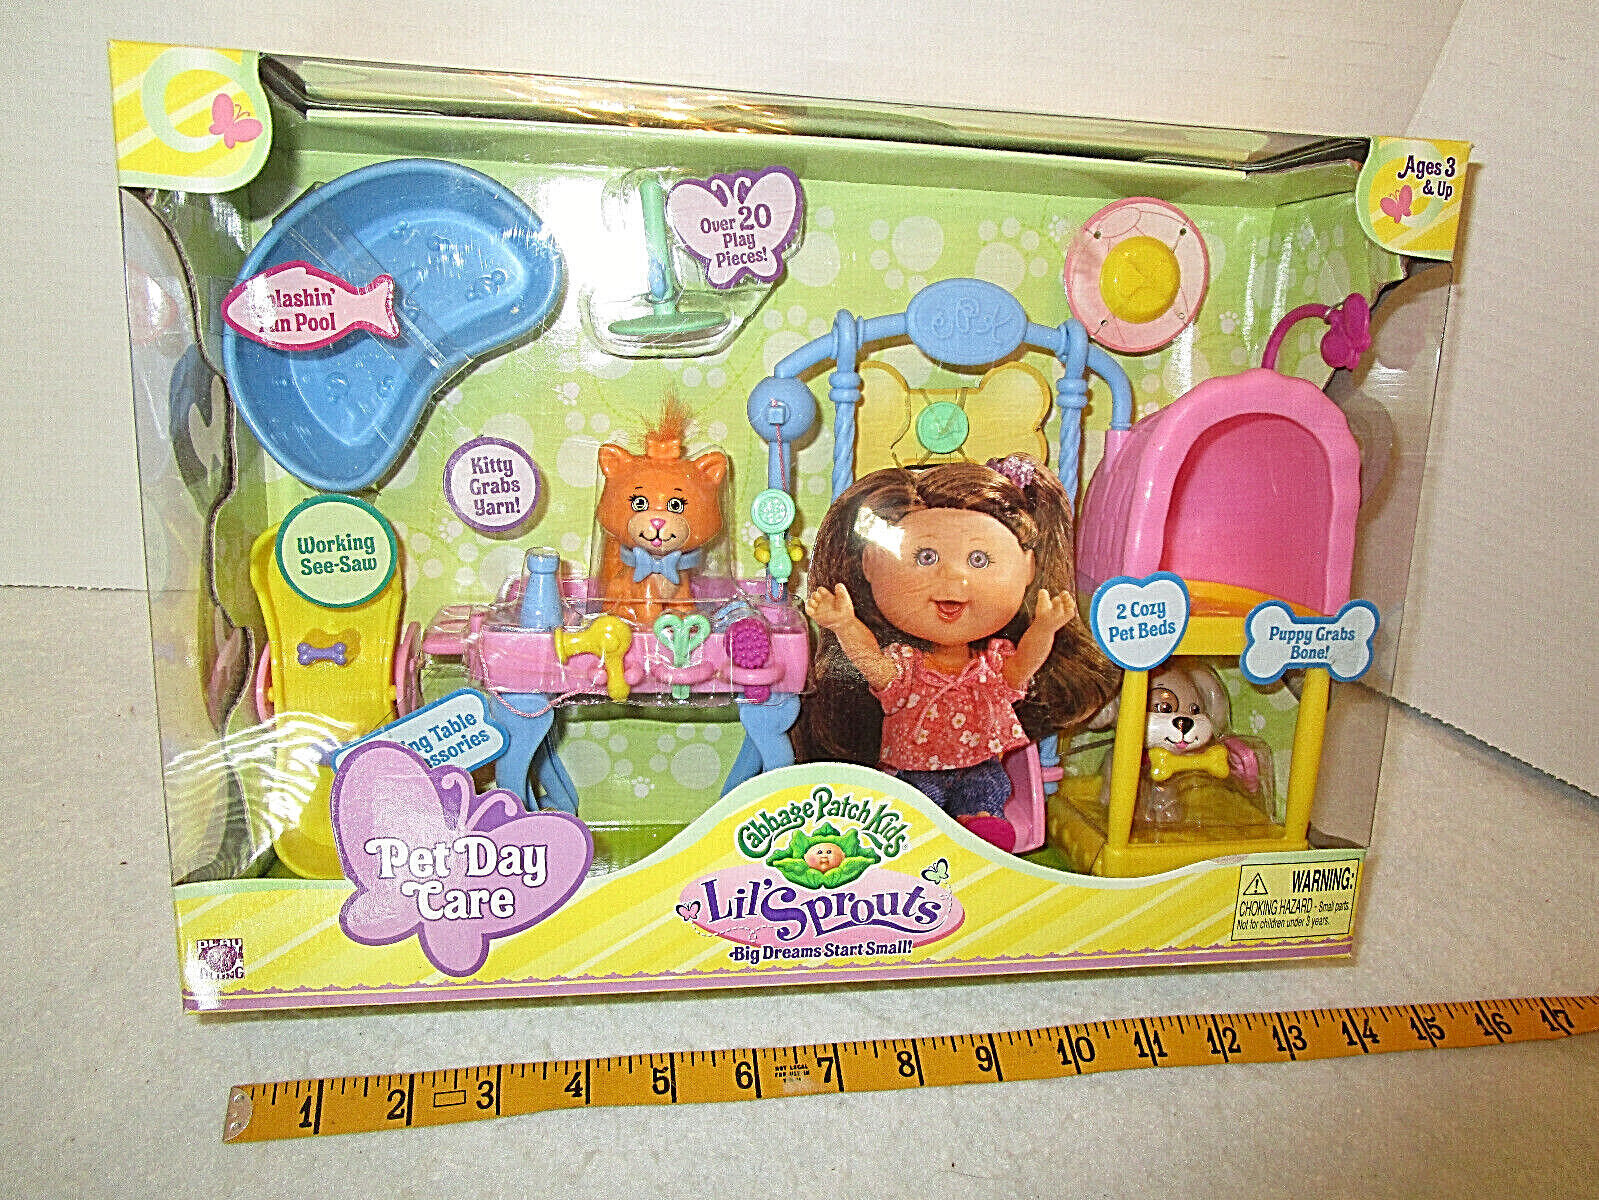 Cabbage Patch Pet Day Care Playset NIB for your 5" dolls and Lil Sprouts - $20.99